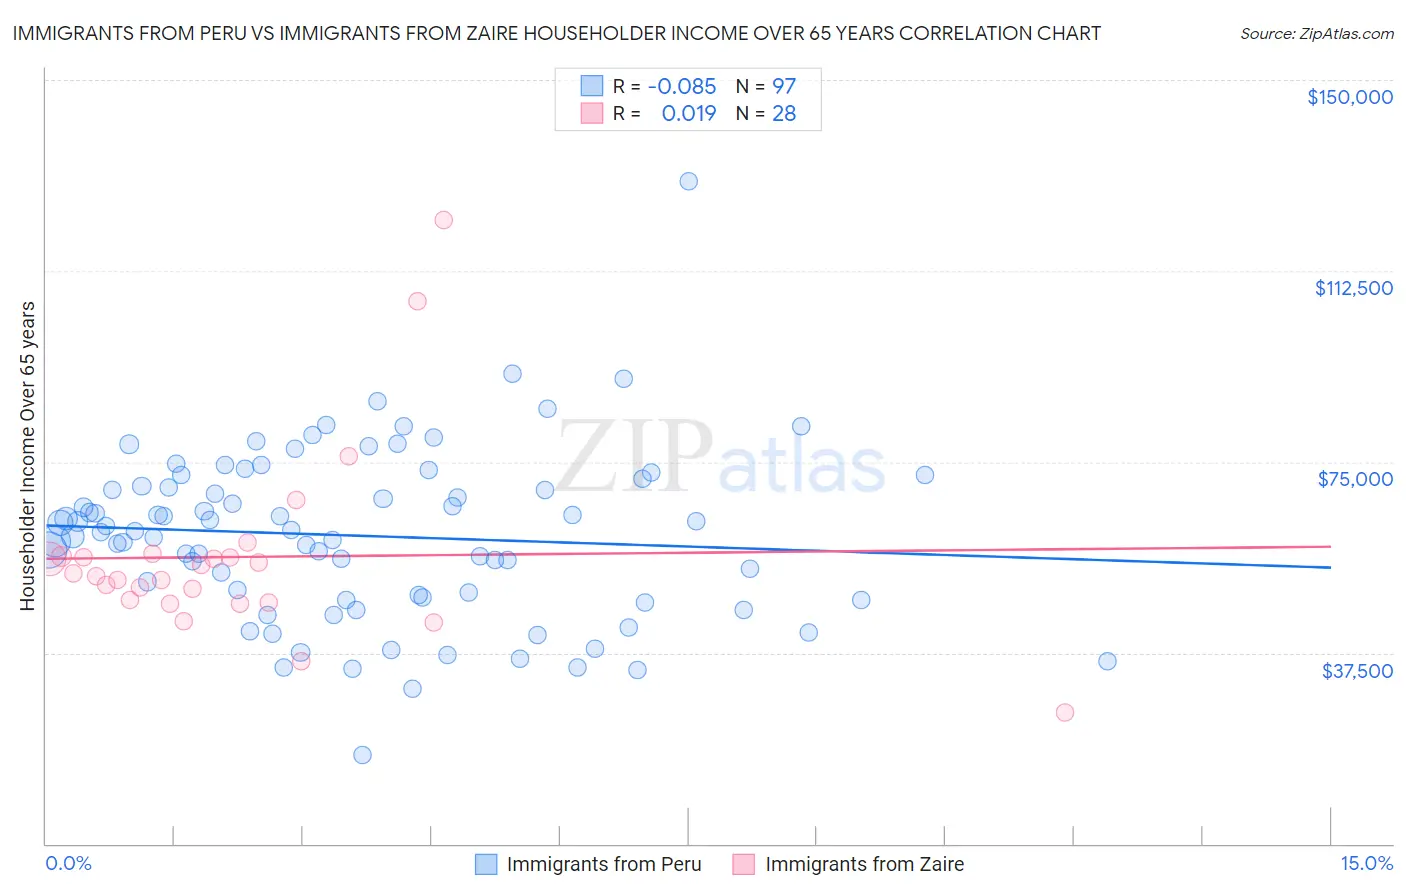 Immigrants from Peru vs Immigrants from Zaire Householder Income Over 65 years